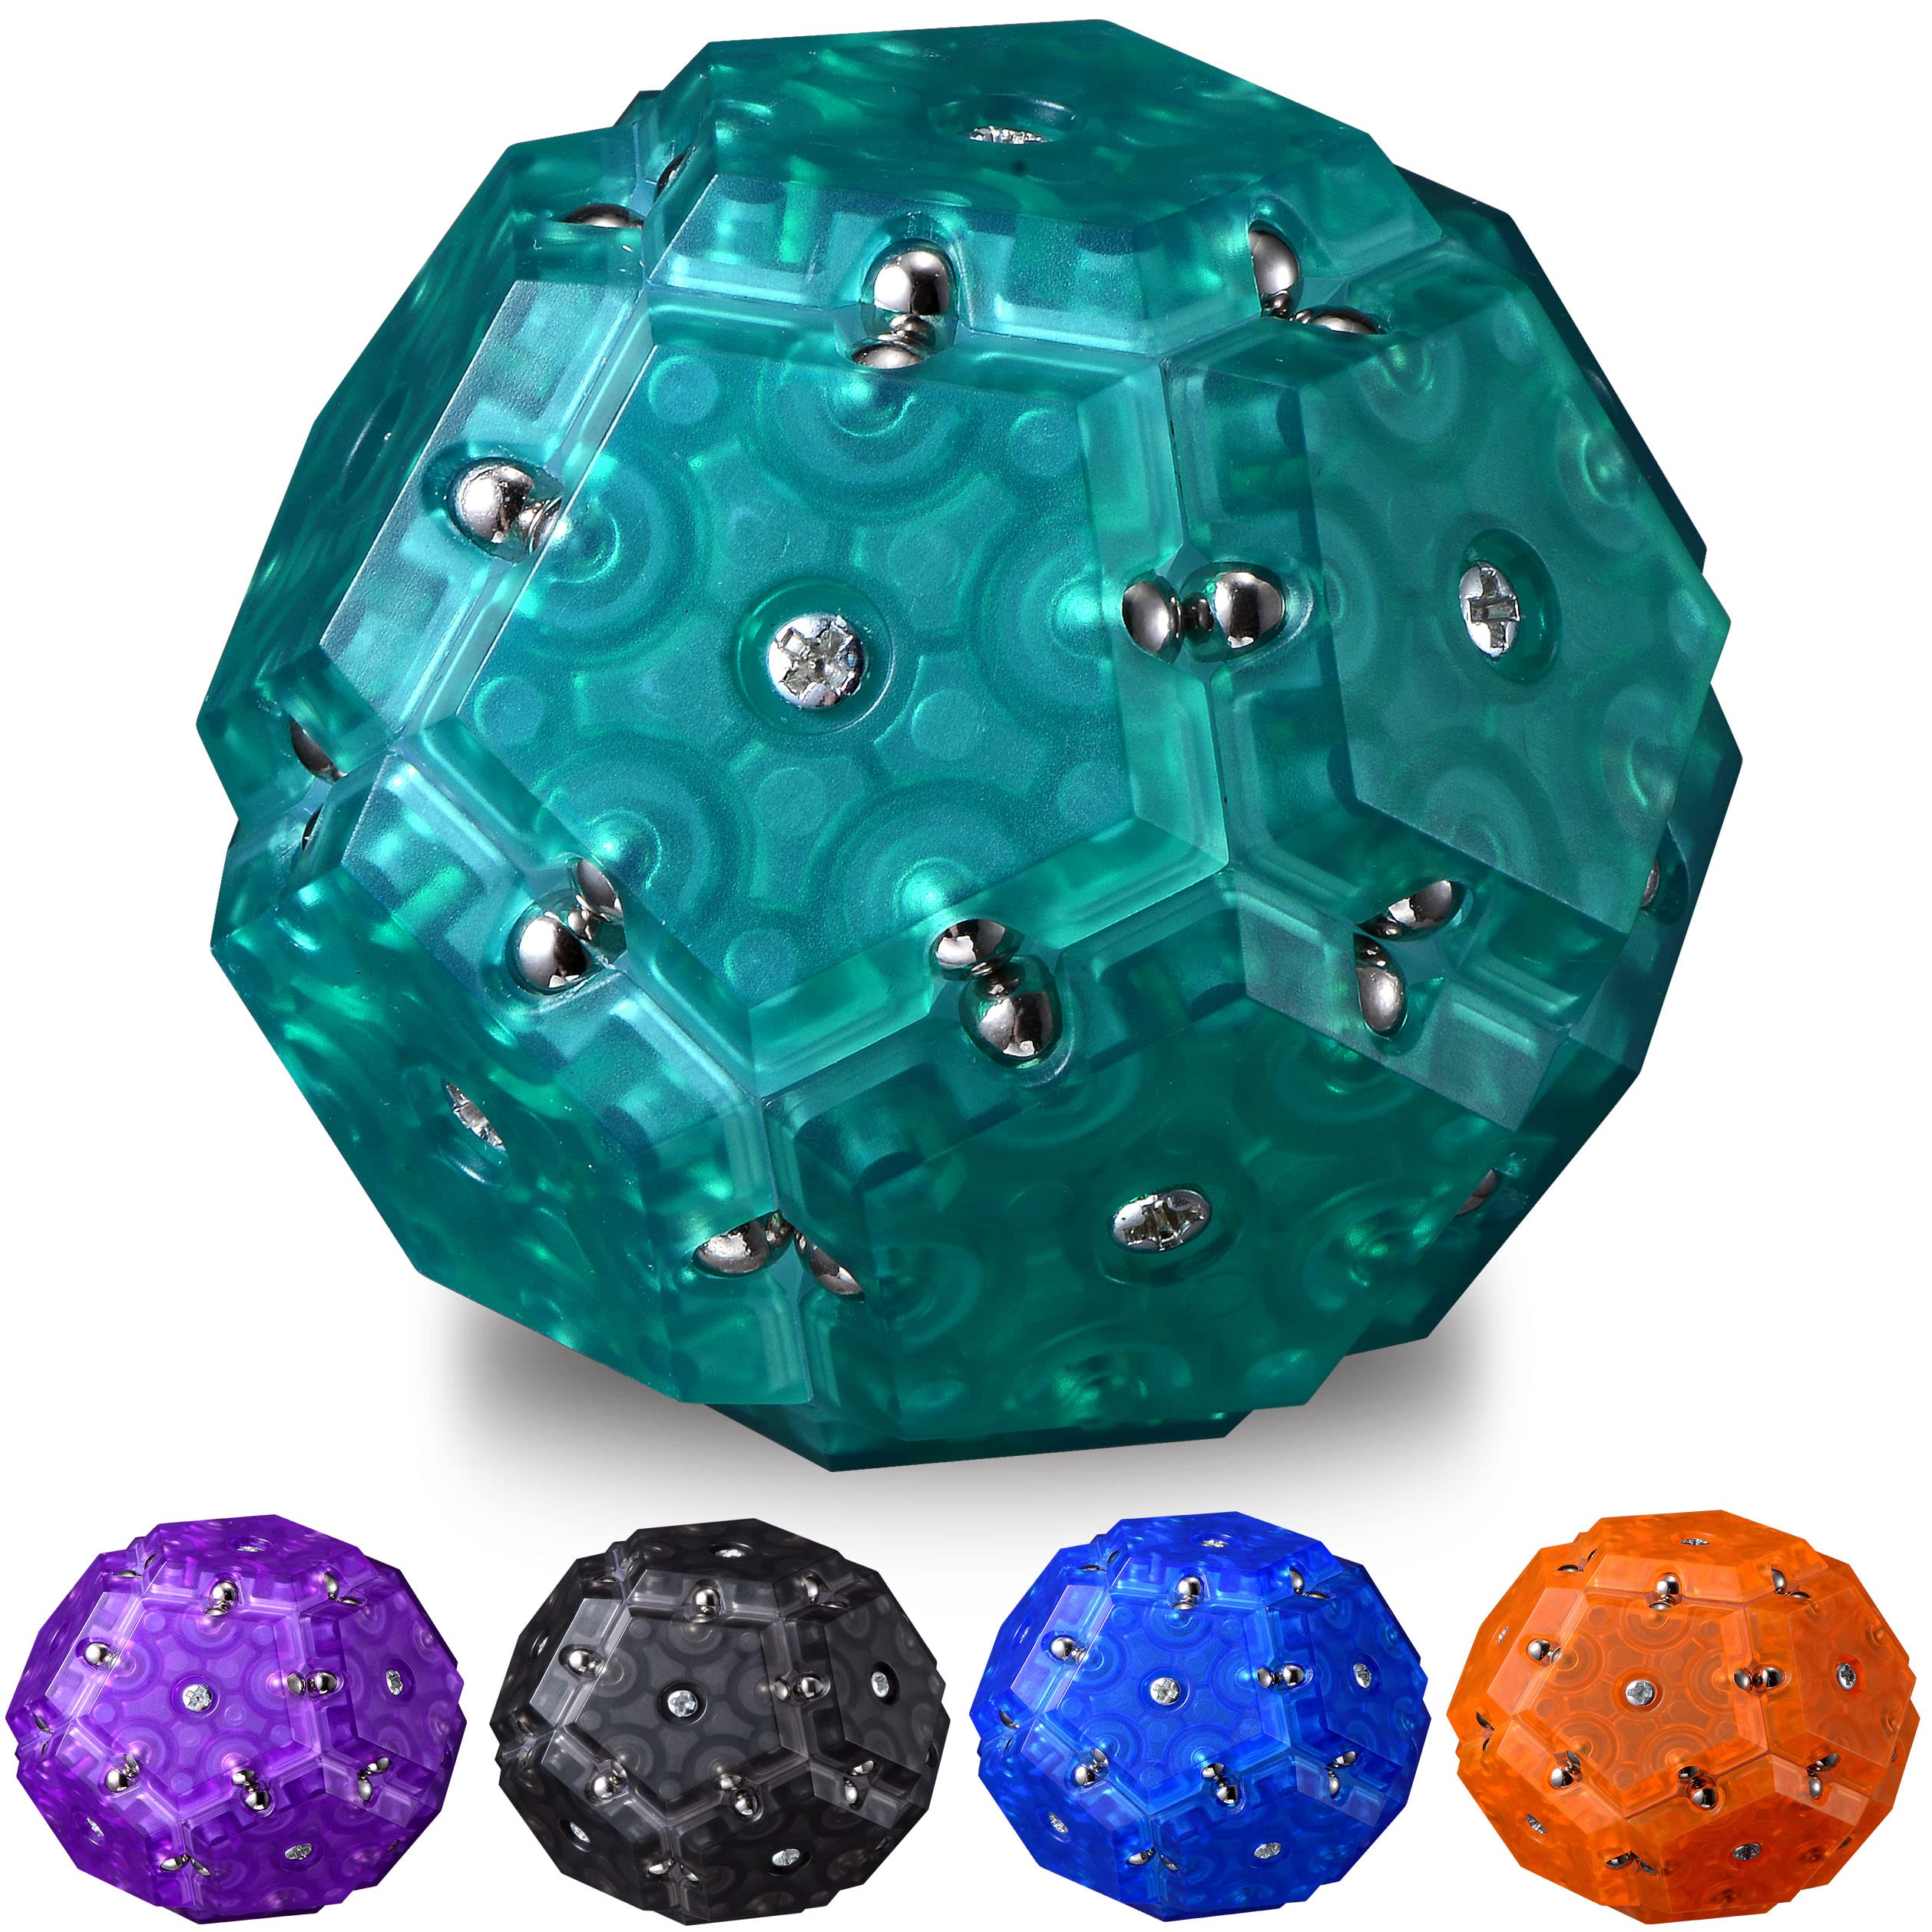 QUALIMATE Magnetic Fuse Beads Balls for Adults Stress Relief Toys Cube  Fidget Gadget Toys Office Desk Toy 216 Pieces Multi-Colored Balls - Magnetic  Fuse Beads Balls for Adults Stress Relief Toys Cube